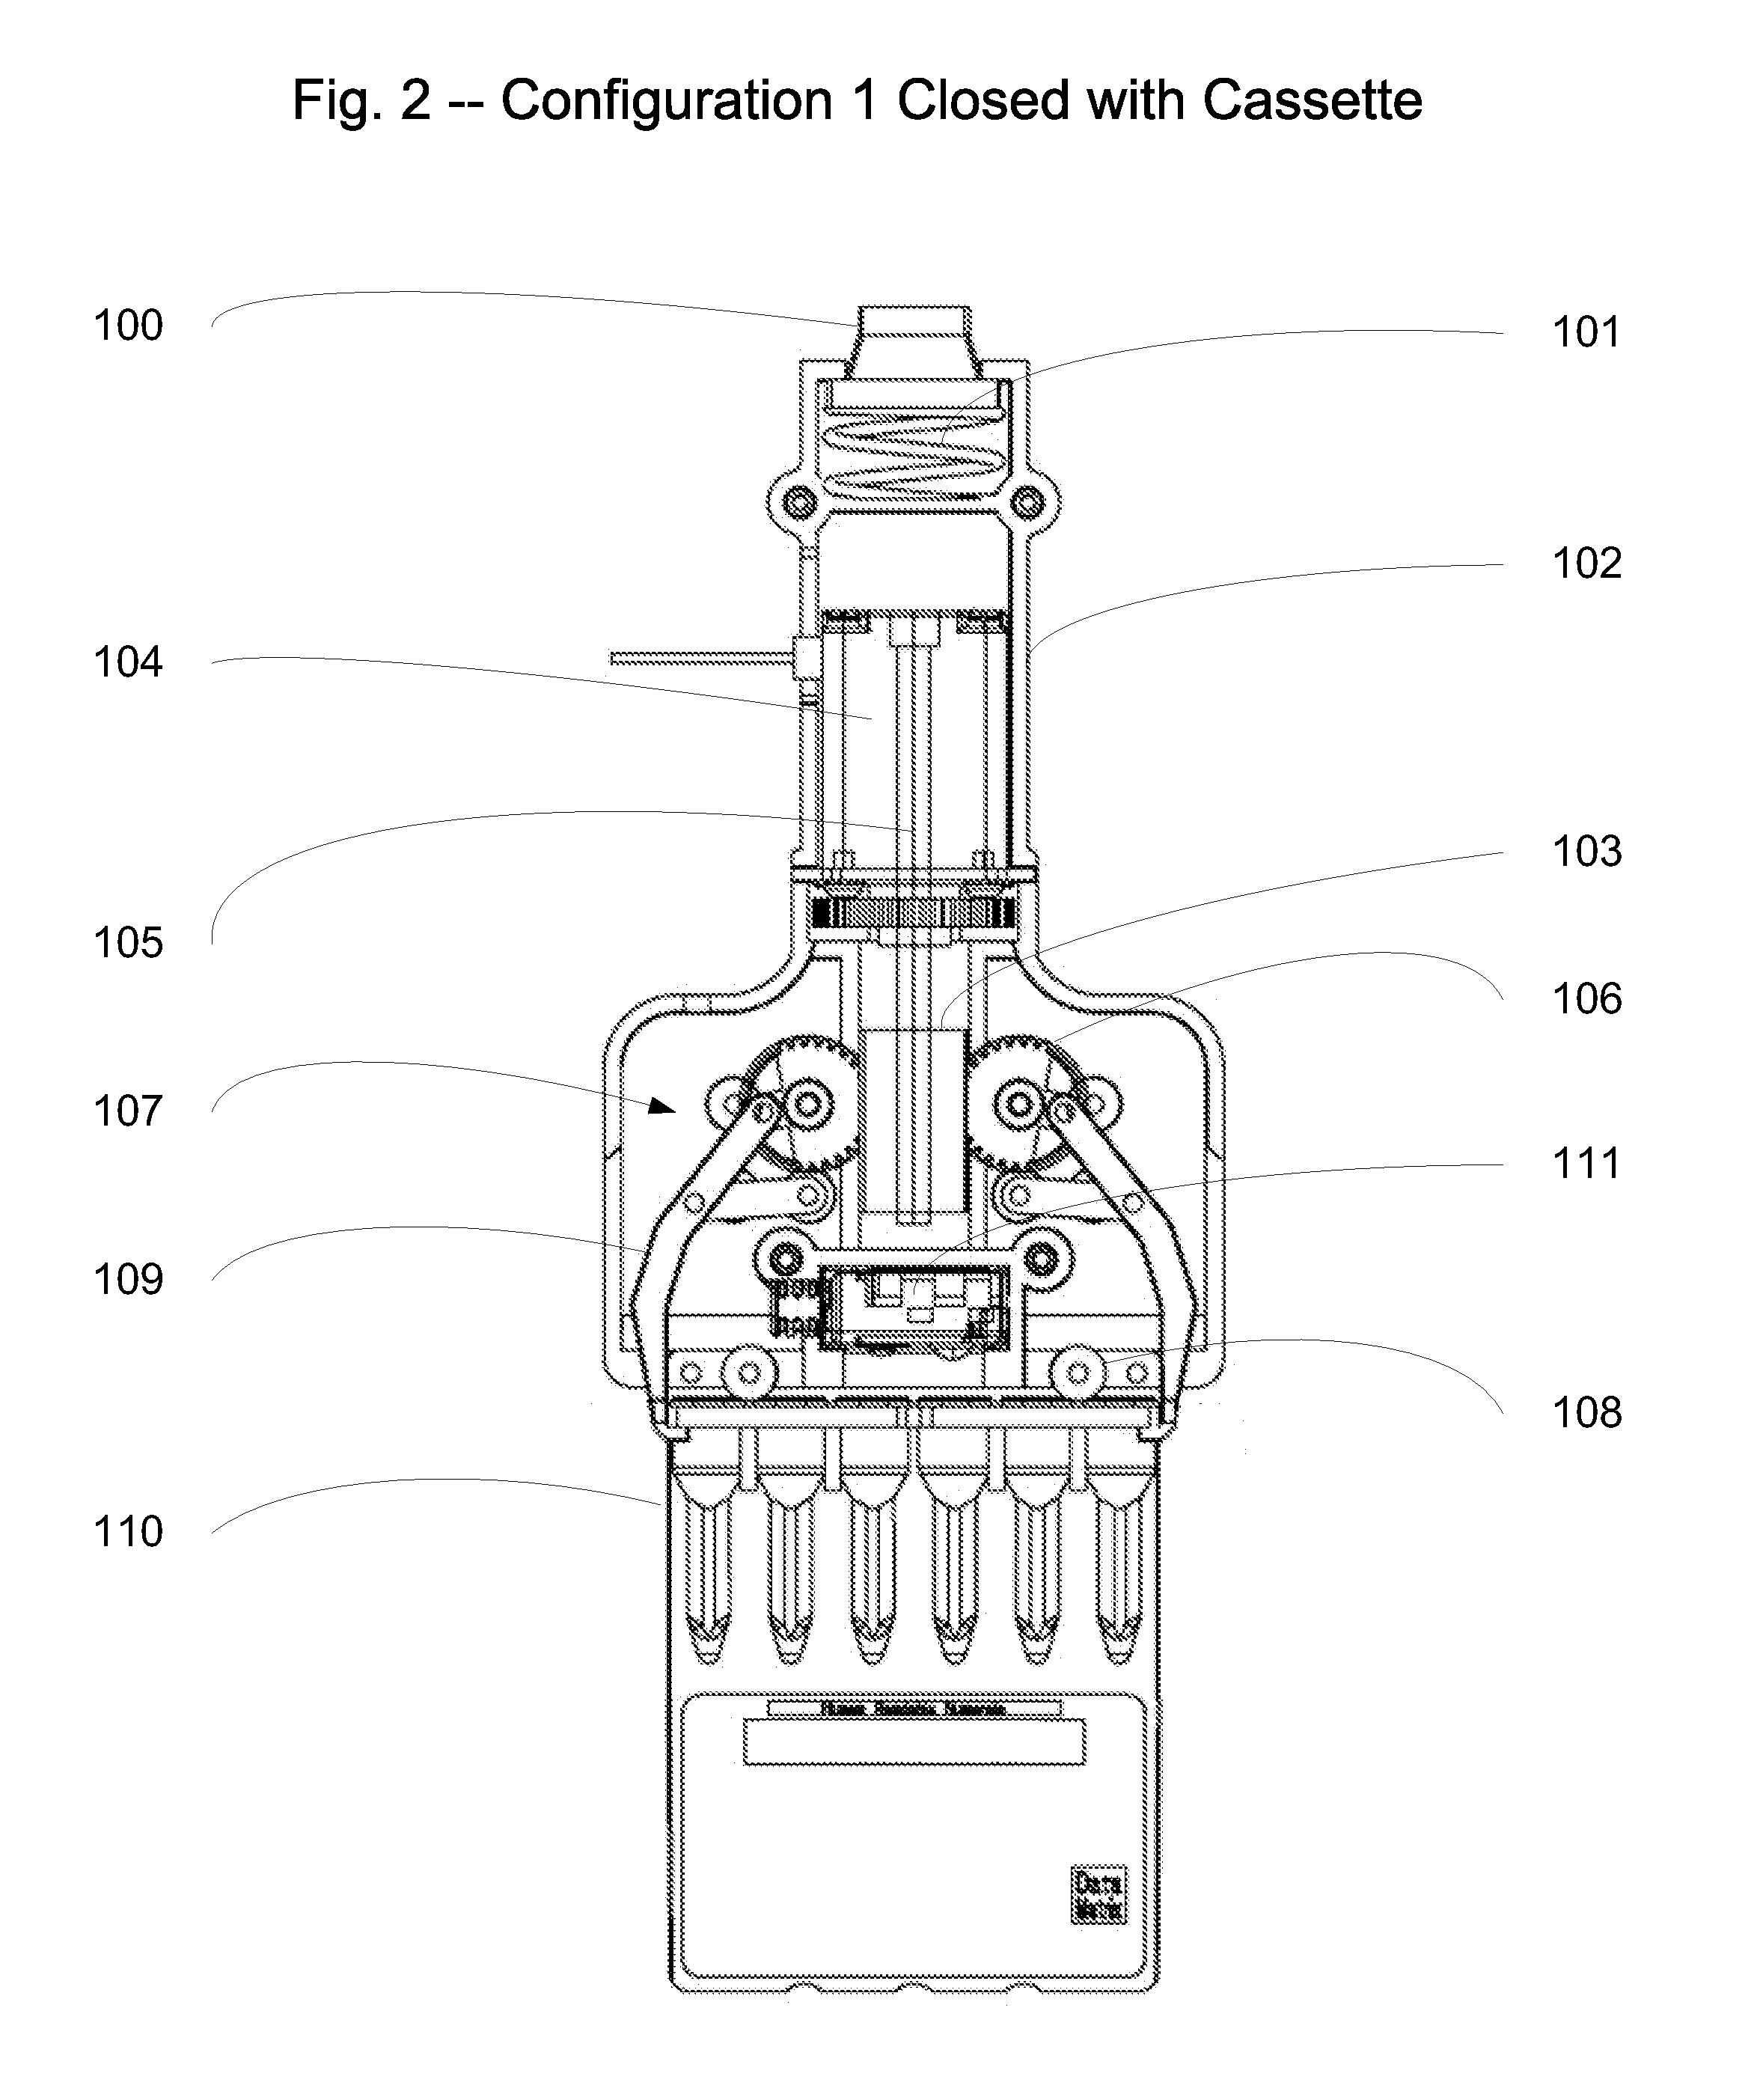 Apparatus for gripping and holding diagnostic cassettes